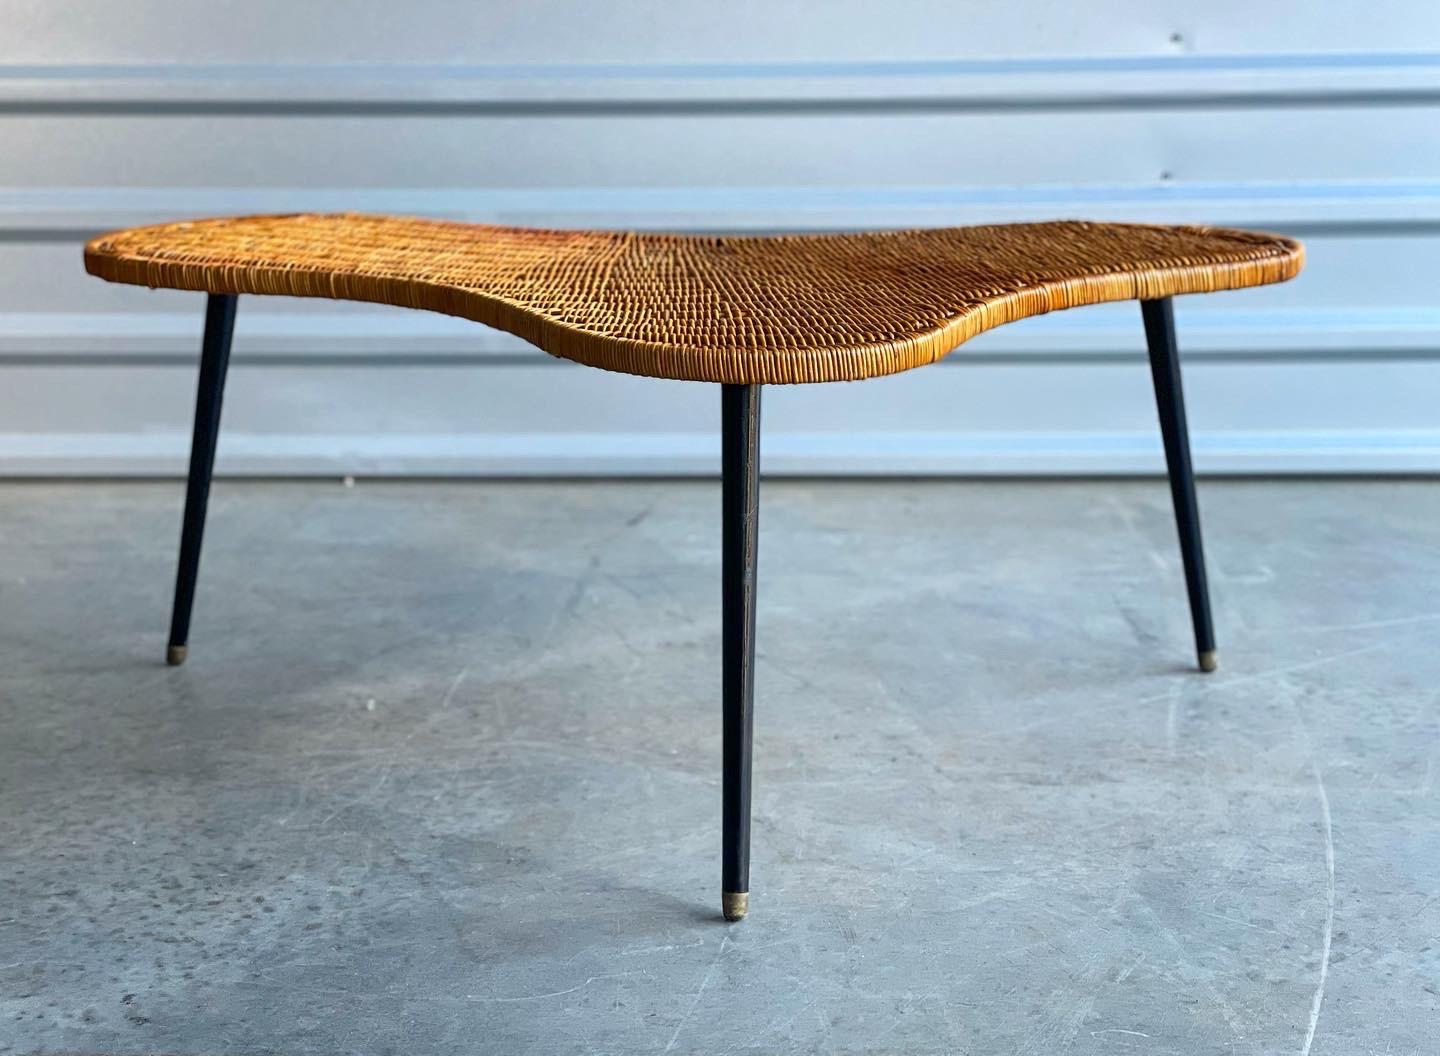 Rare organic rattan and lacquered iron coffee table, France, circa early 1950's. Free flowing kidney shaped woven top with tapered metal legs. 
Table is in overall excellent condition. Rattan is completely intact and shows a gorgeous warm patina.